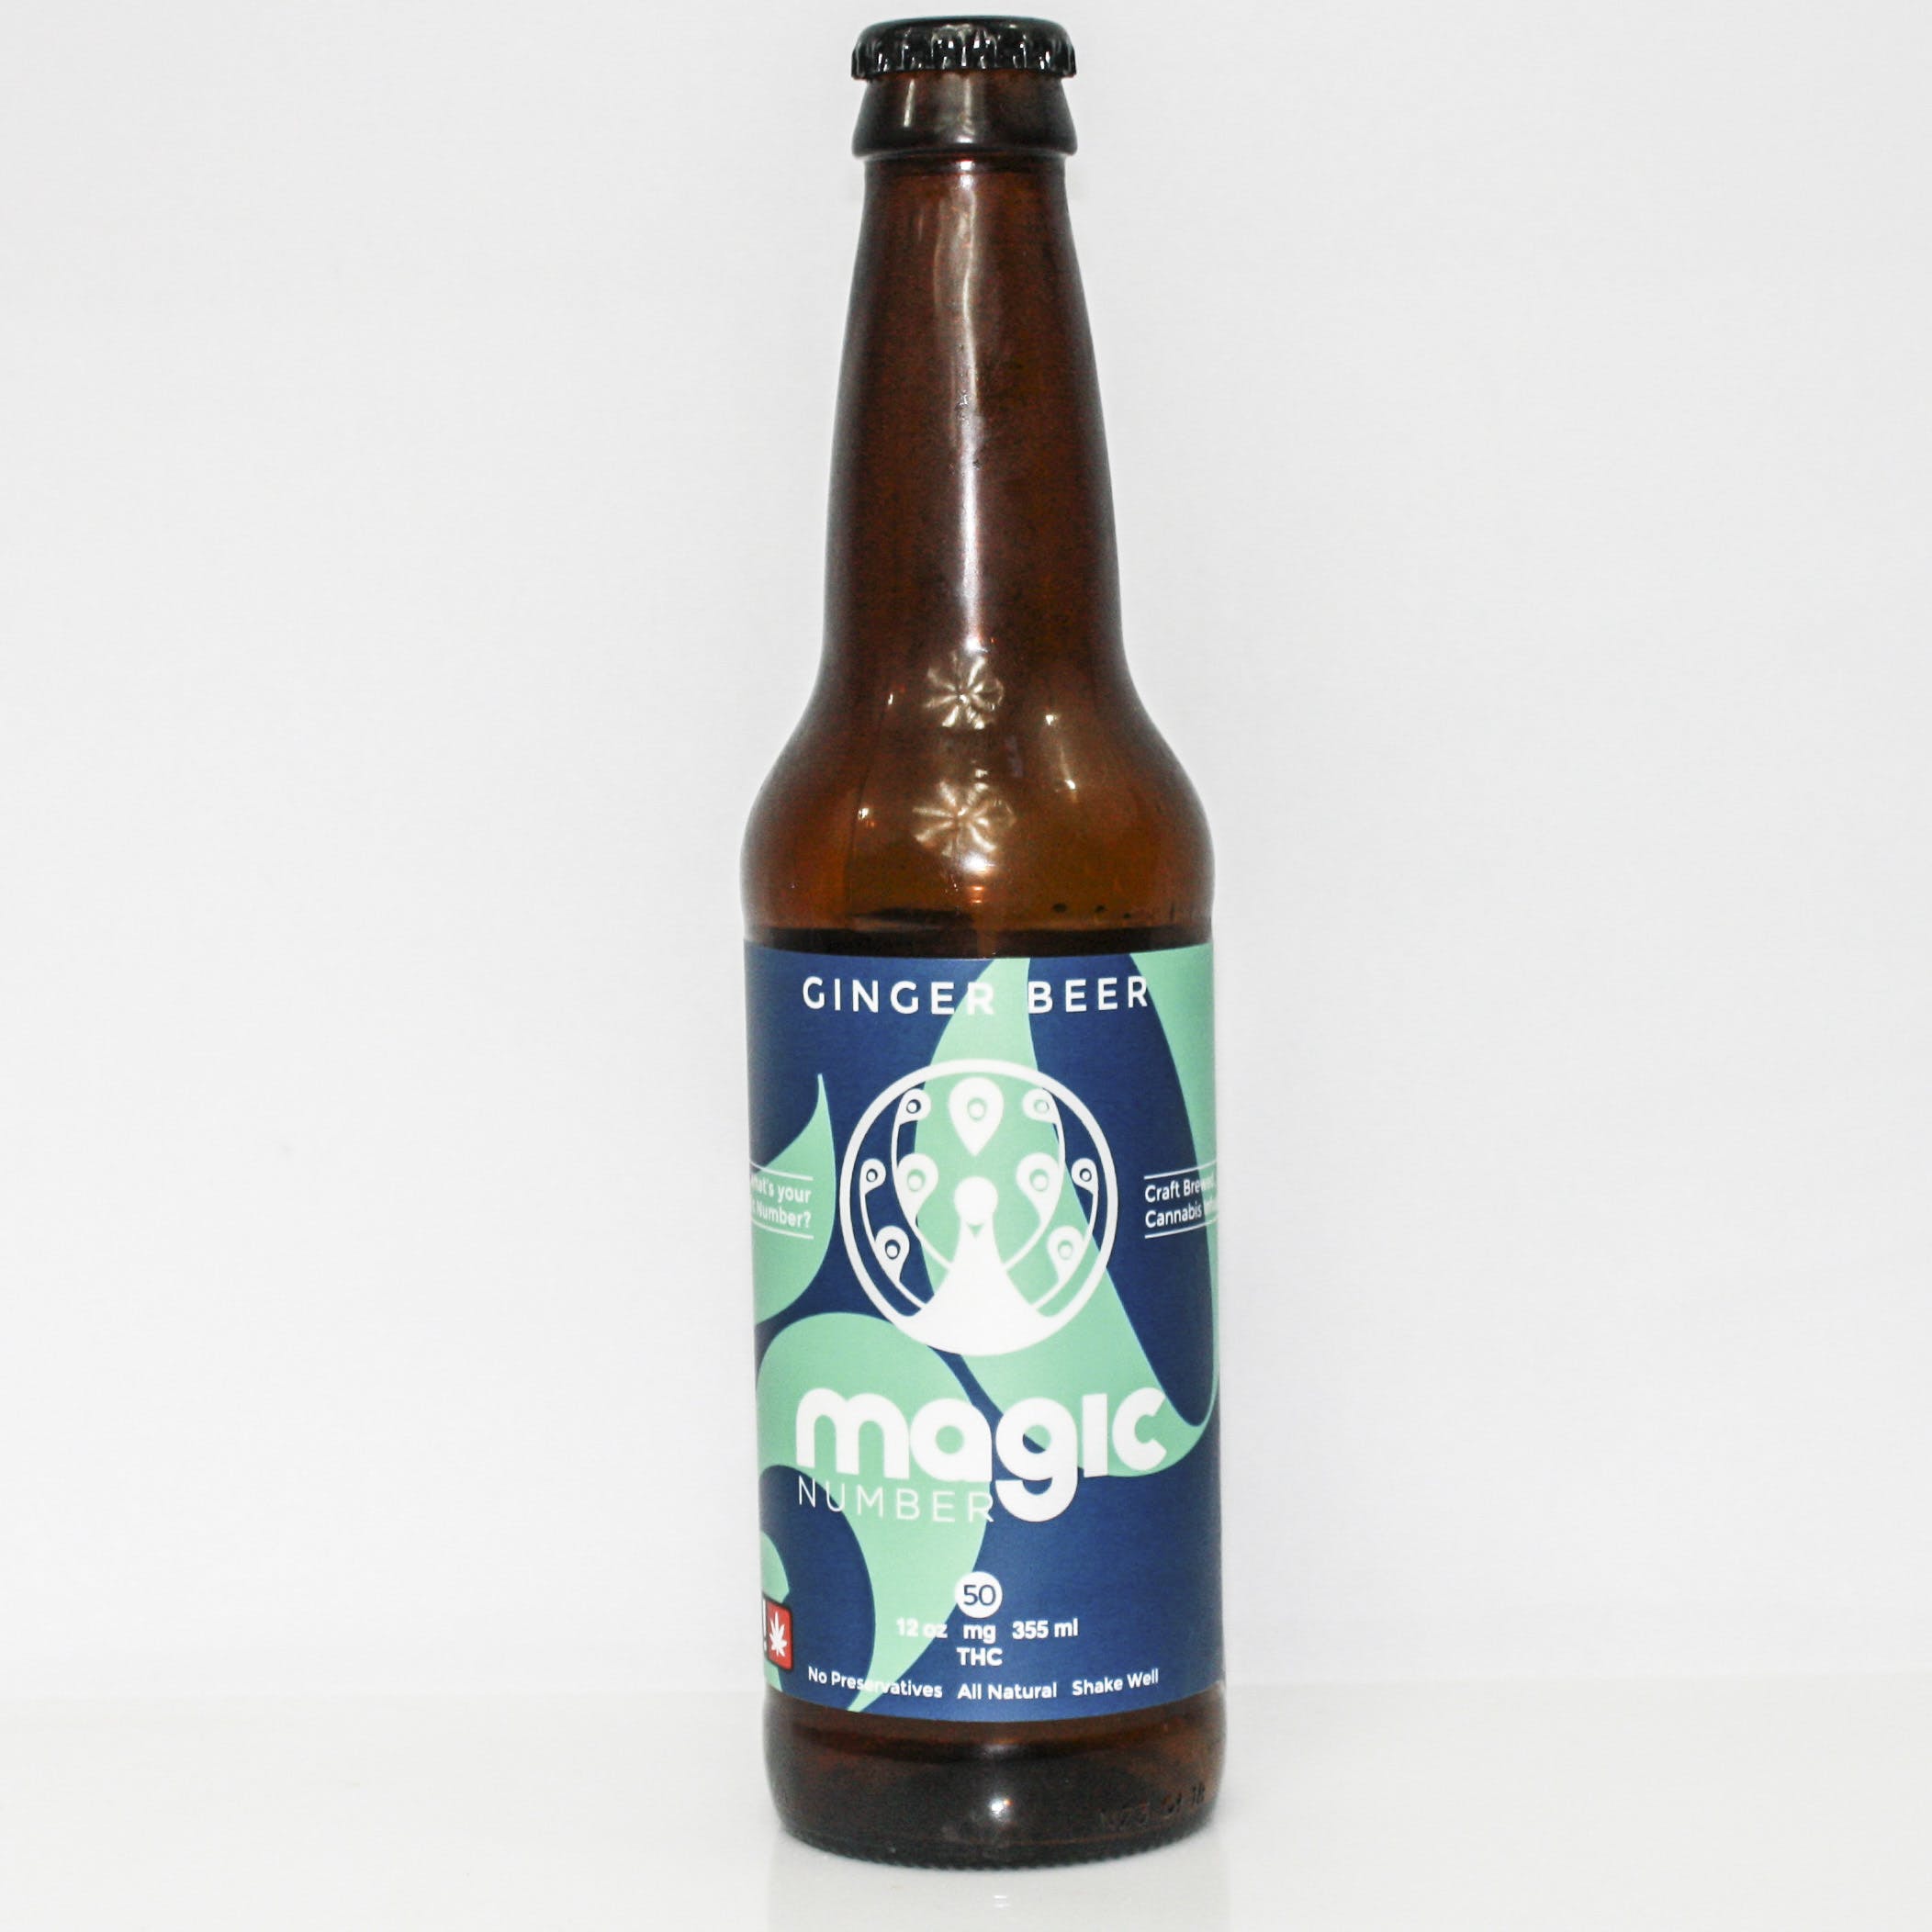 Ginger Beer | Magic Number | 50mg THC